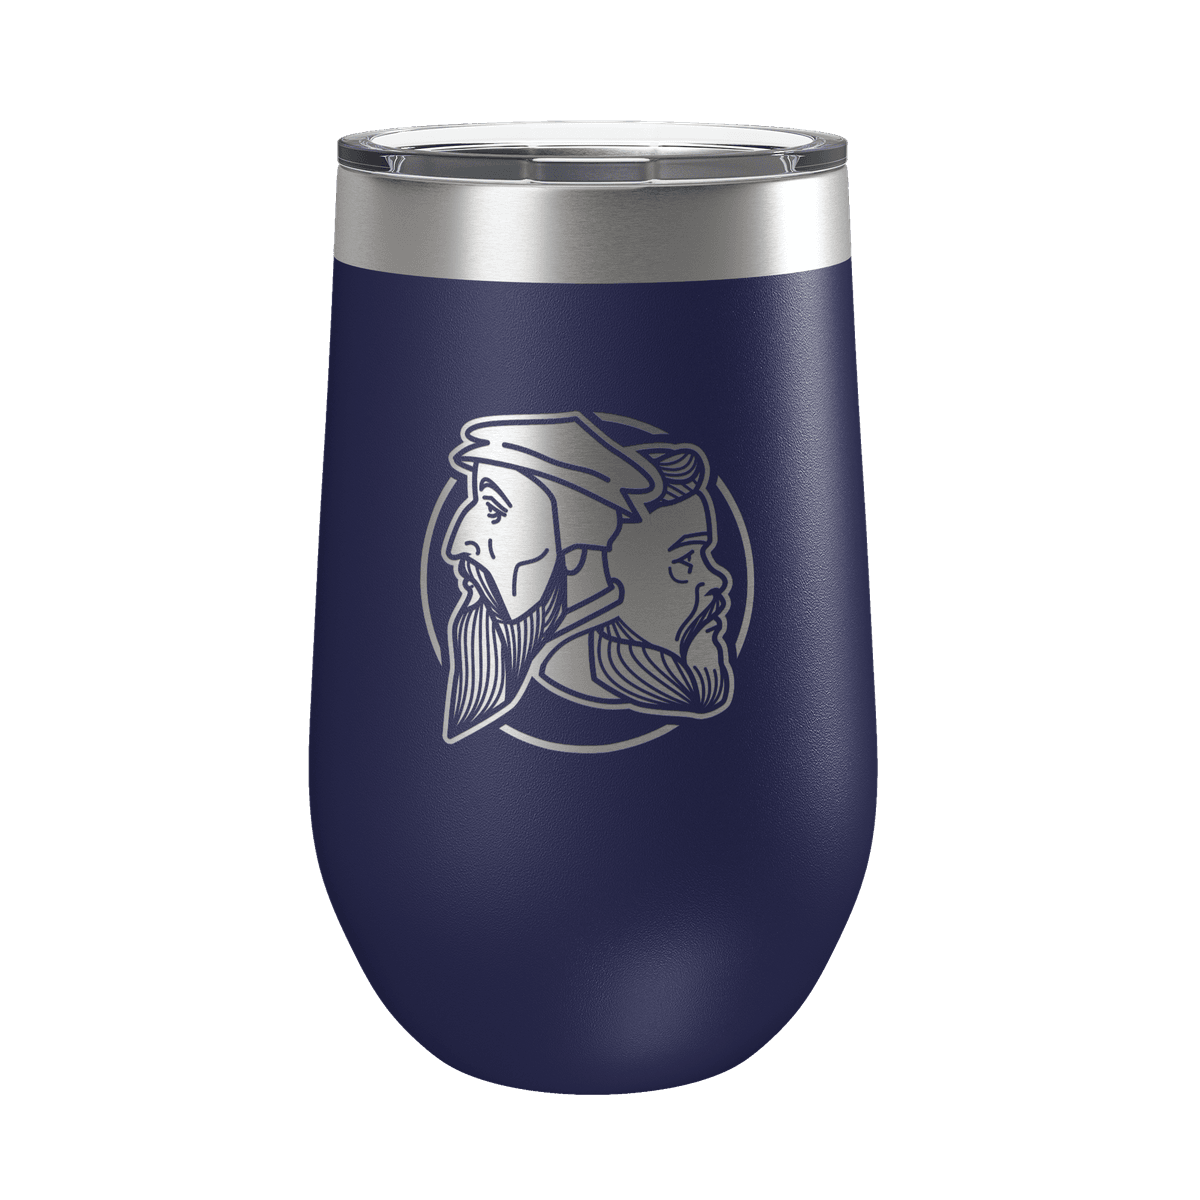 https://d11xh0uby8avni.cloudfront.net/fit-in/0x1200/products/MW01-tumbler16-navy.png